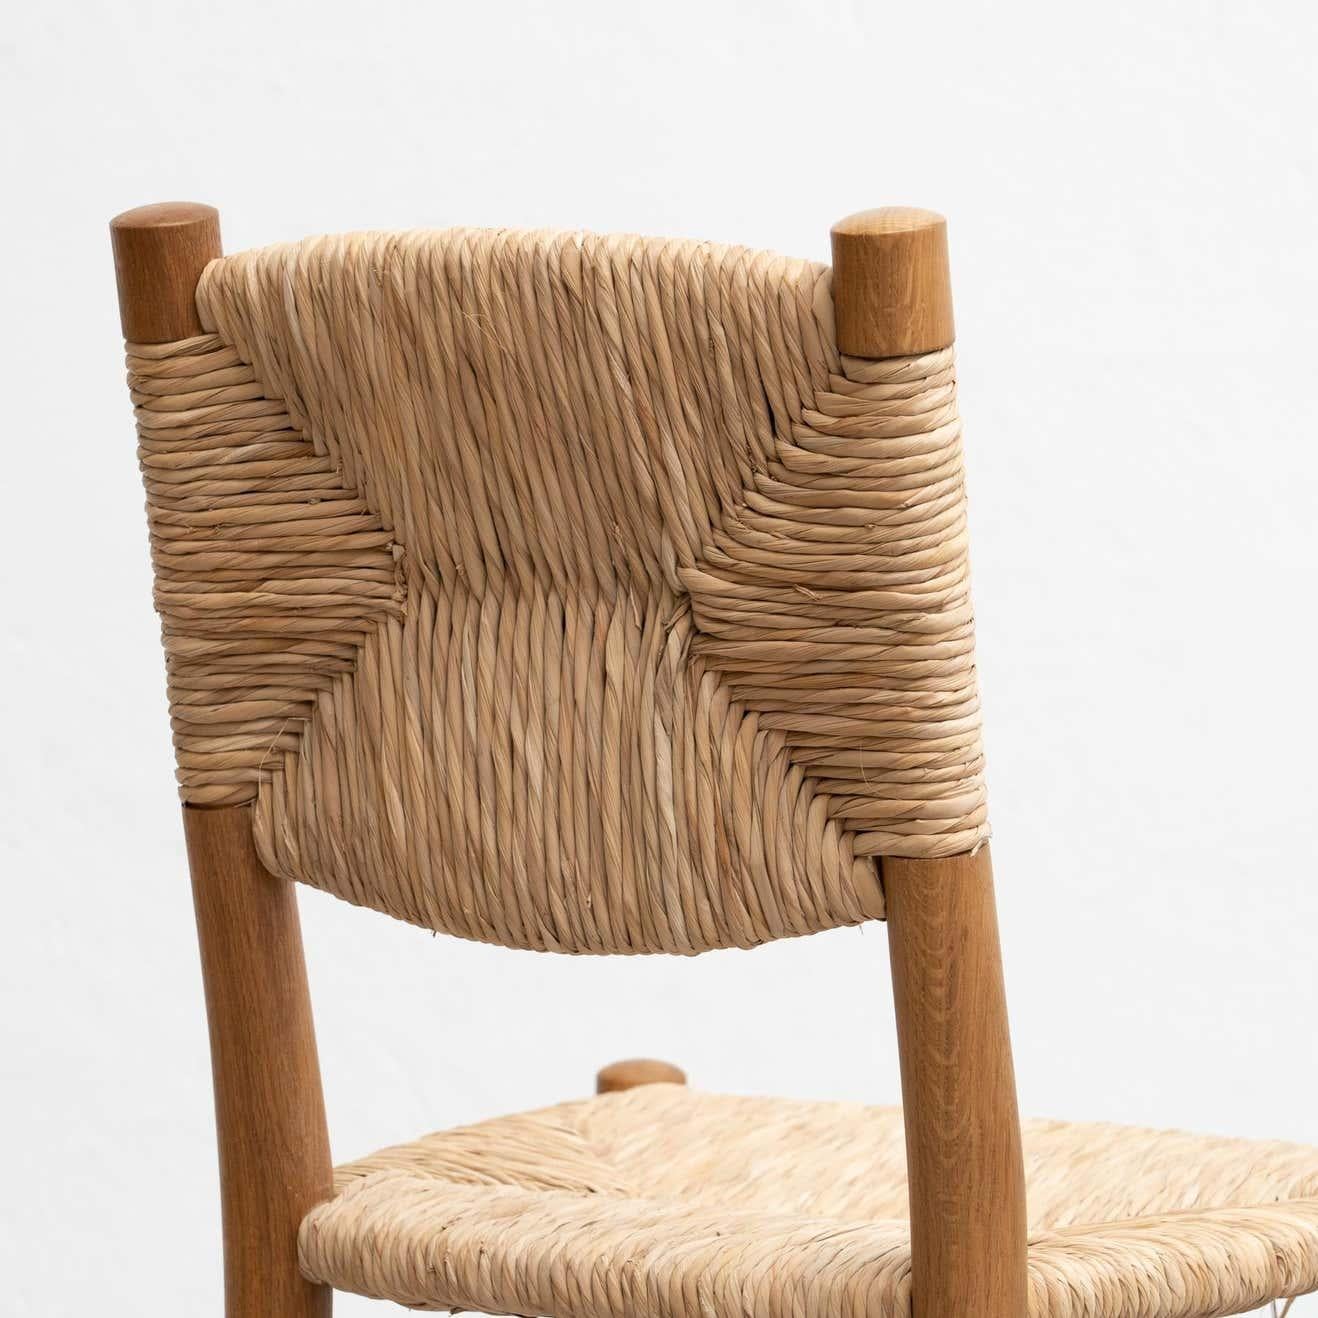 Set of Six After Charlotte Perriand N.19 Chairs, Wood Rattan, Mid-Century Modern For Sale 9